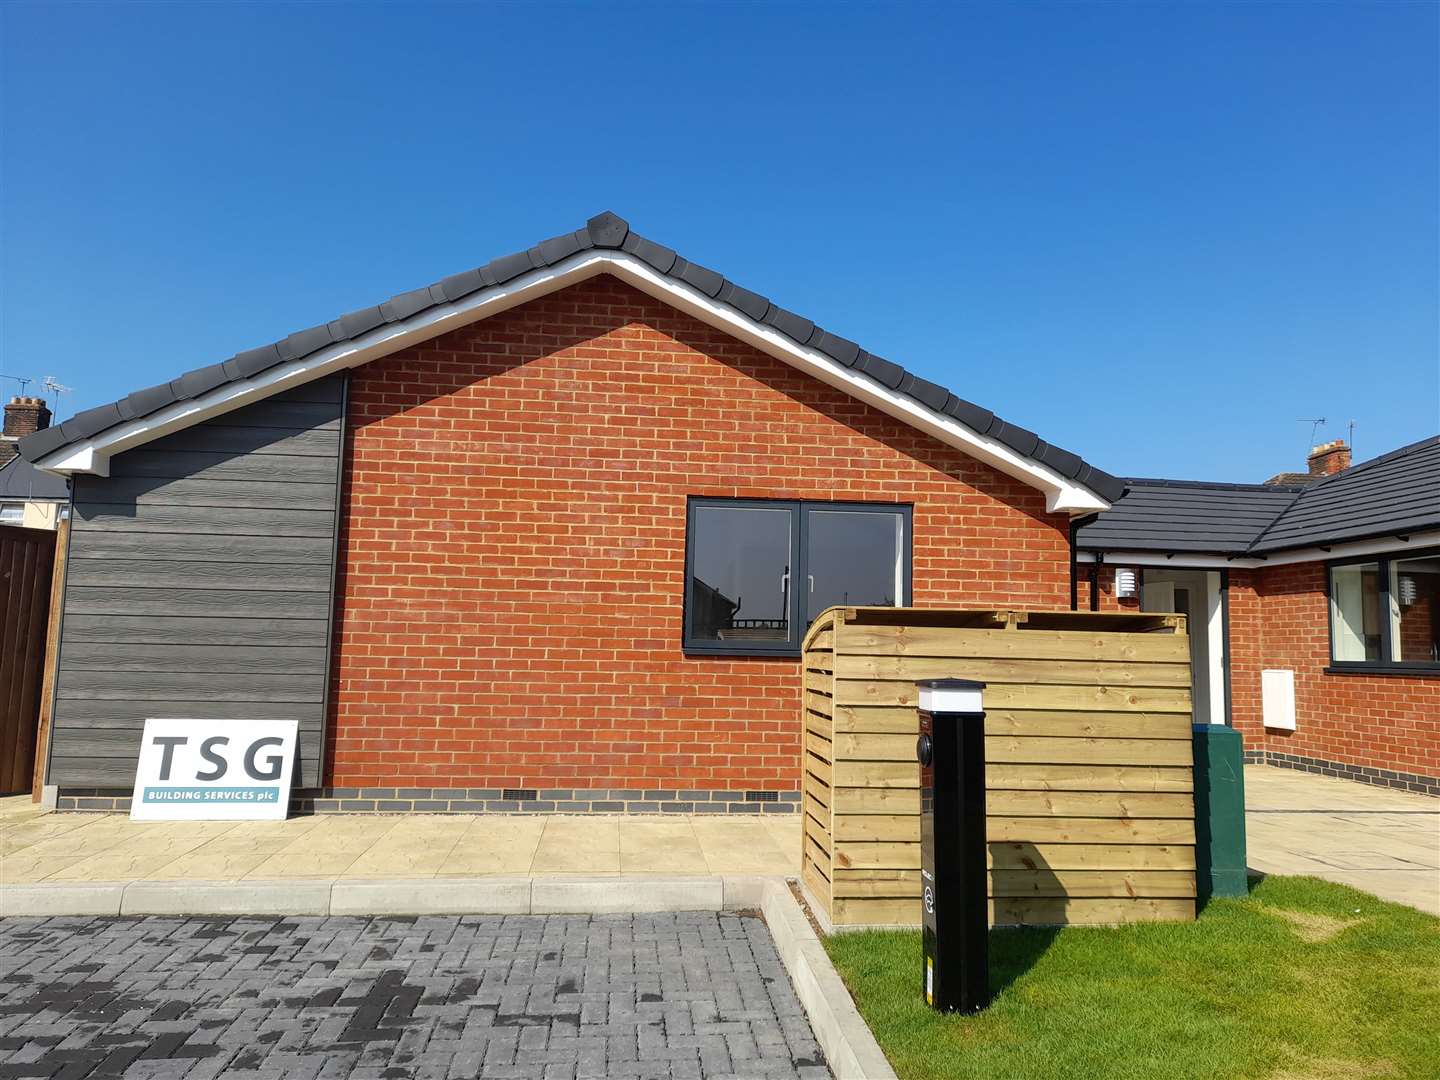 The new homes in Mead Crescent, Dartford have been built for people with additional needs and are part of Dartford council's social housing building programme. Picture: Dartford council